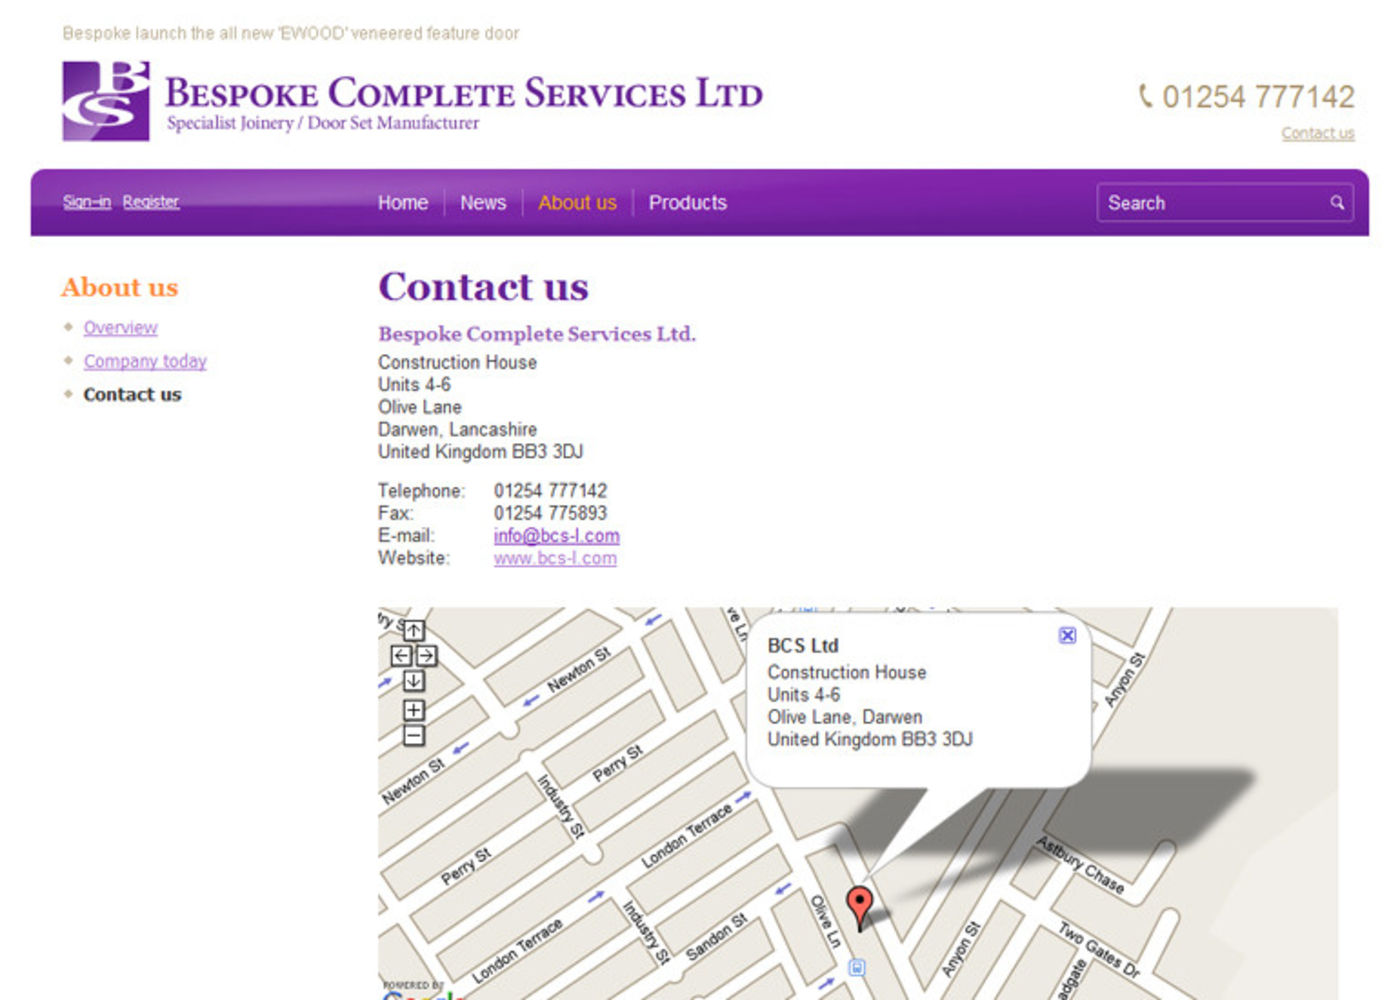 Bespoke Complete Services Ltd Contact us